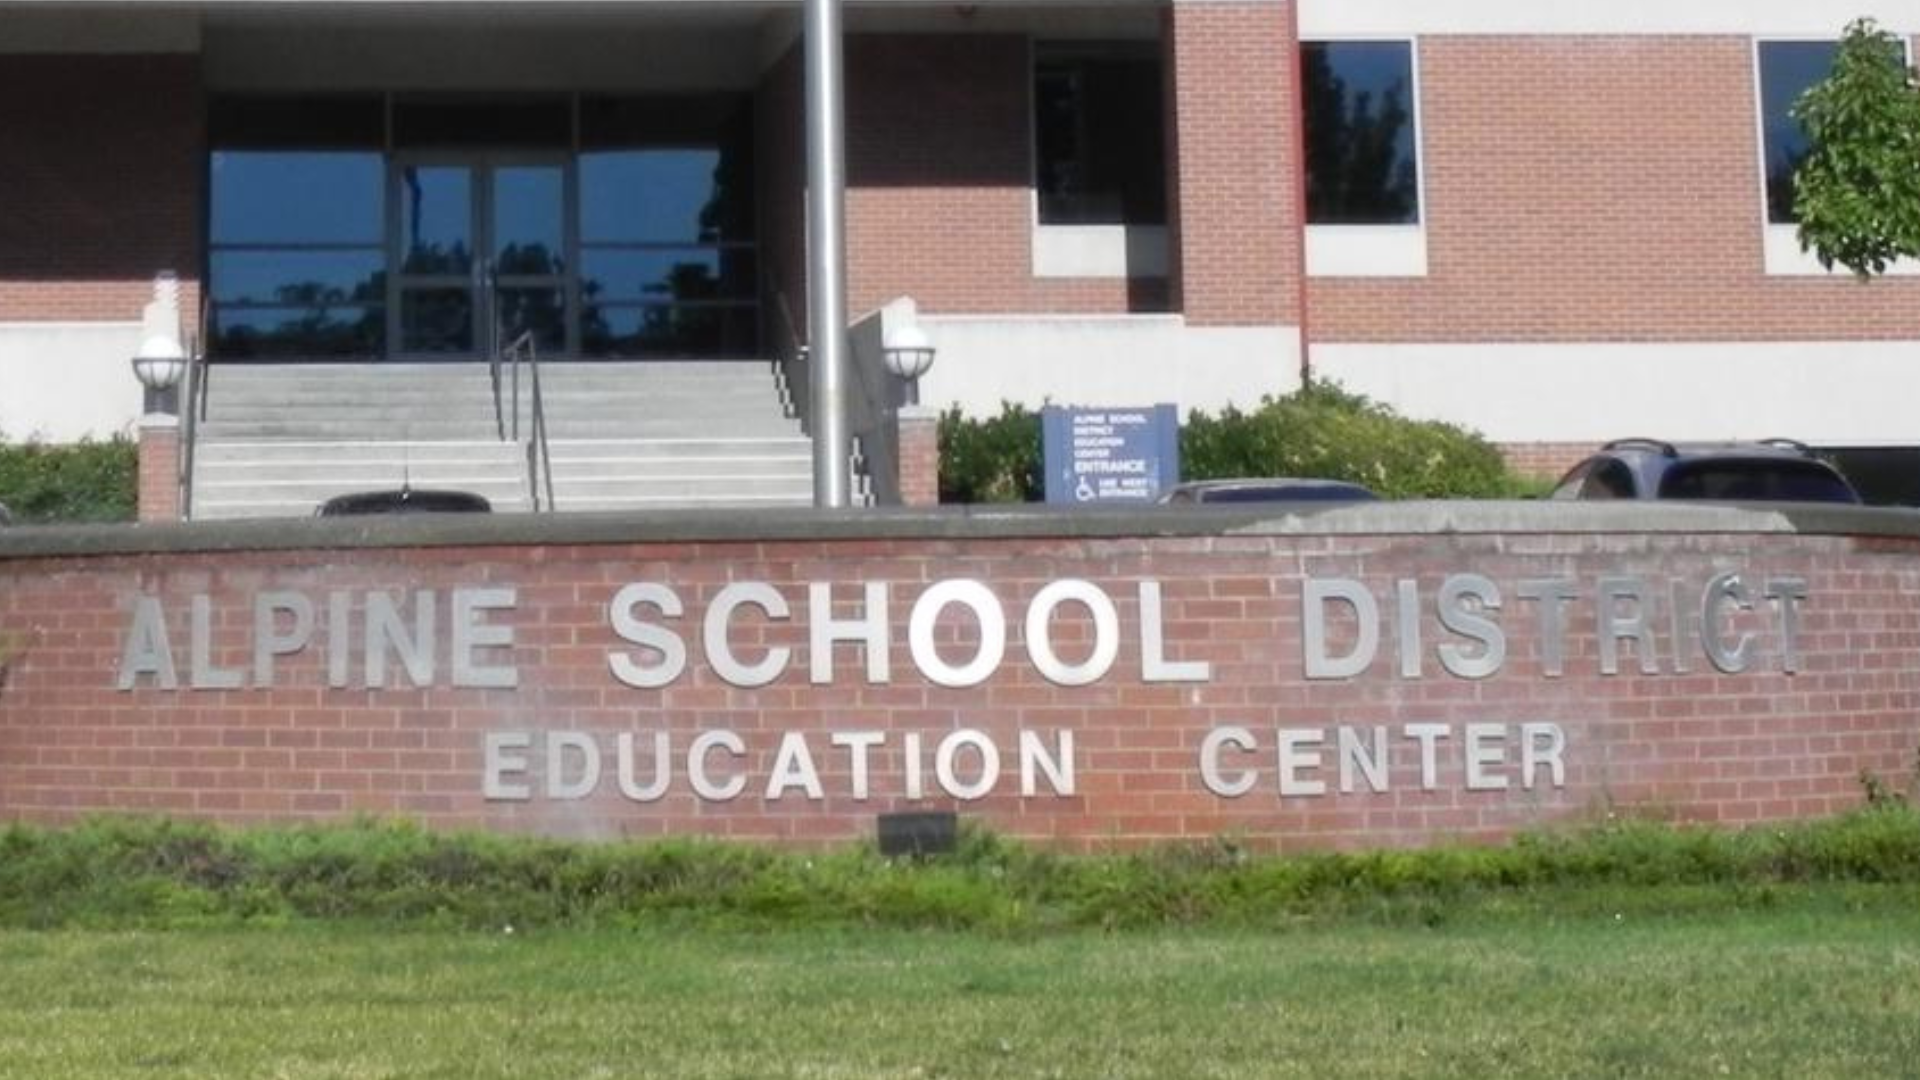 Computer systems in the Alpine School District are being investigated after the district's technolo...